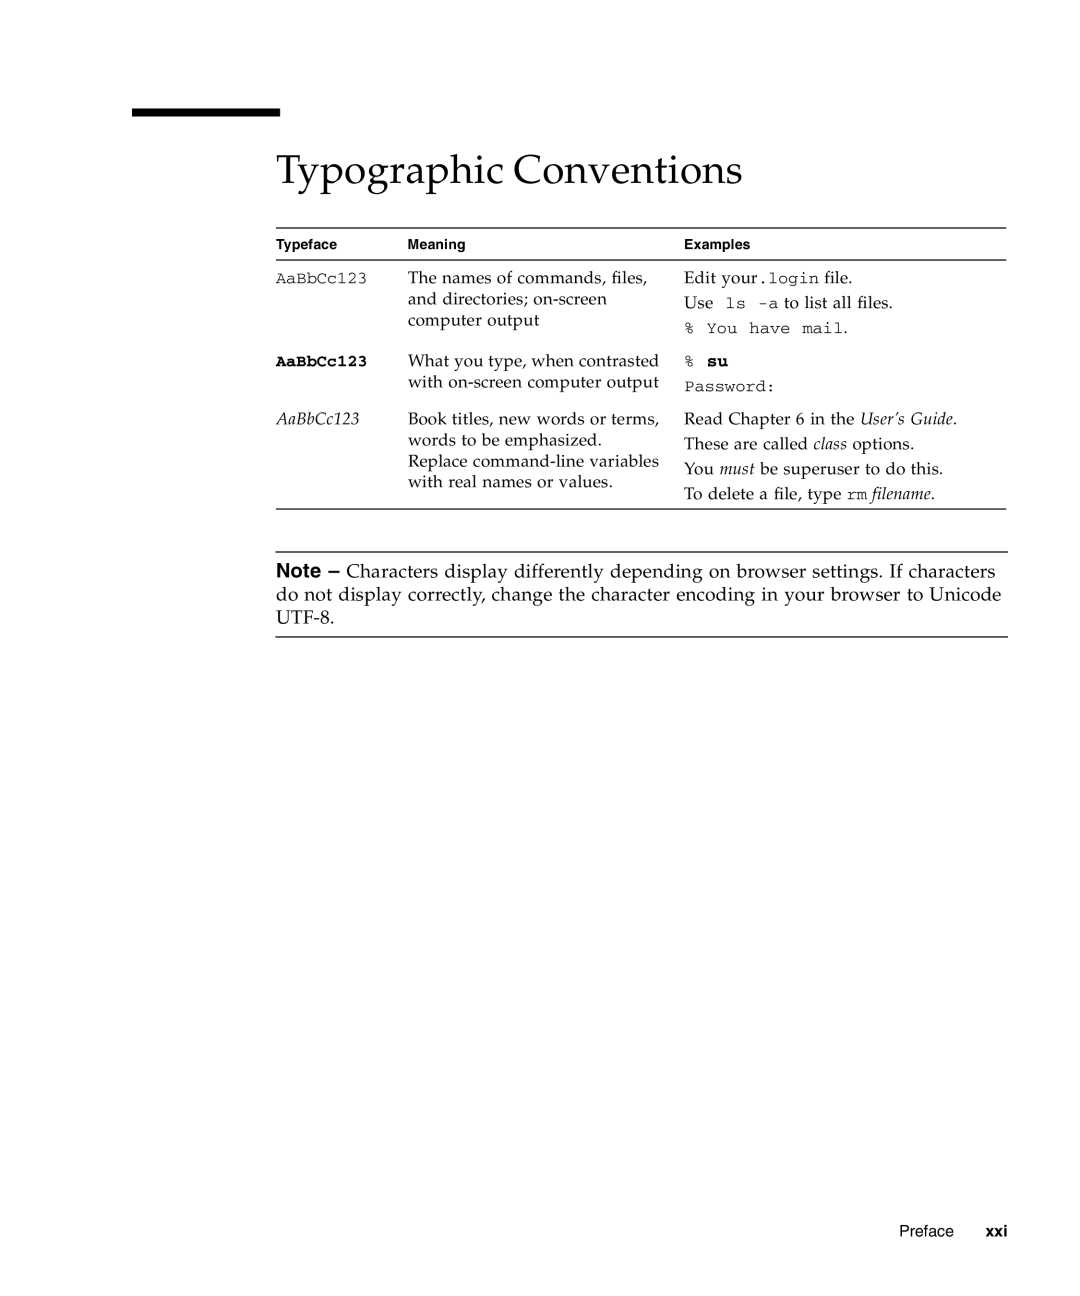 Sun Microsystems CP3240 manual Typographic Conventions 